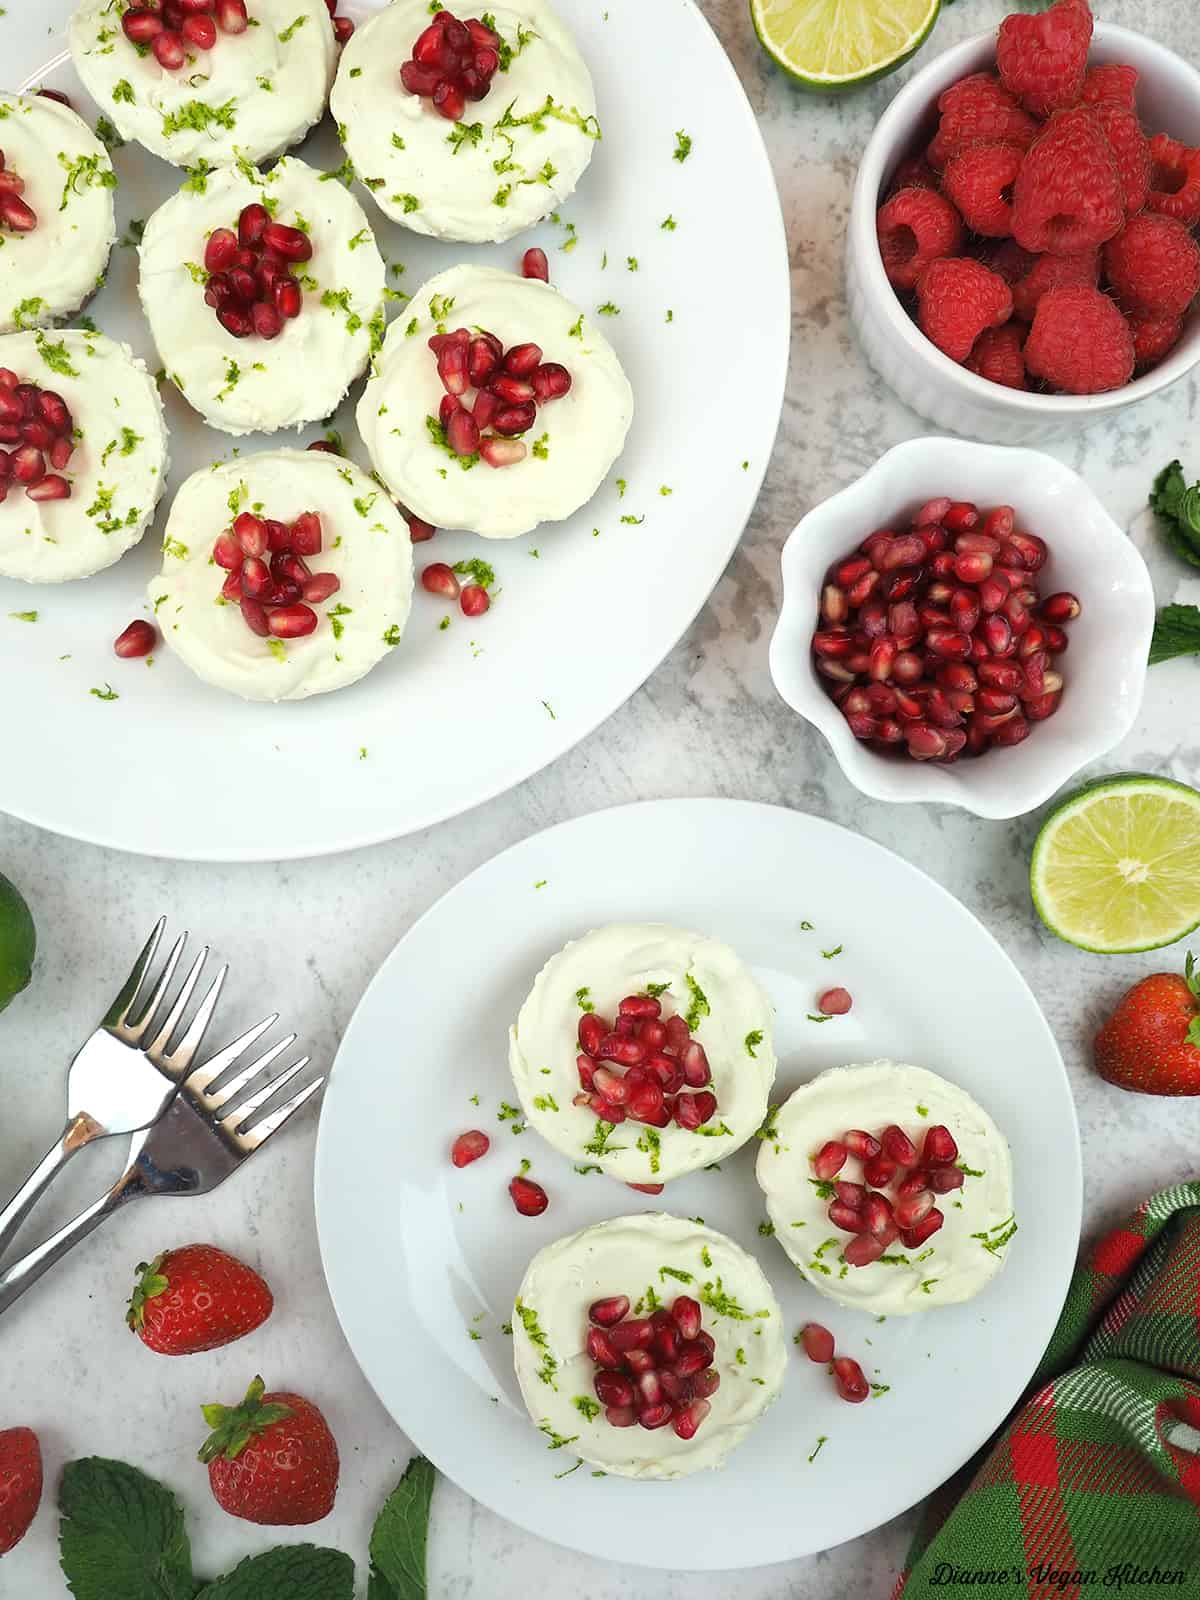 Vegan Key Lime Cheesecake with berries, limes, pomegranate seeds and forks